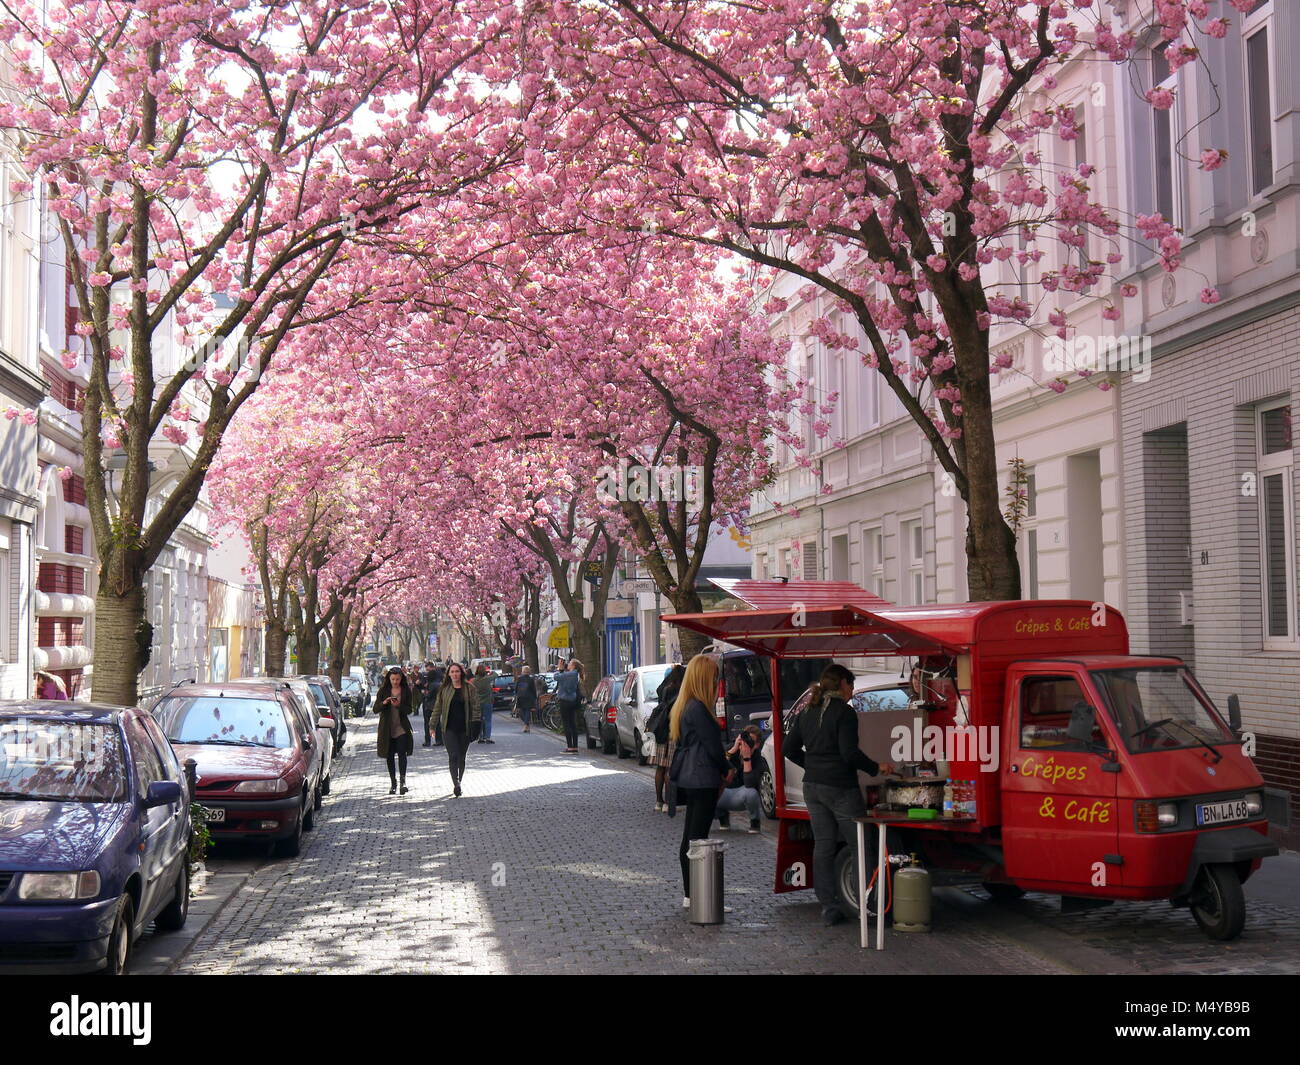 BONN, GERMANY - APRIL 18, 2016: Little mobile coffee shop under rows of cherry blossoms sakura trees in Bonn, former capital of Germany on a beautiful Stock Photo